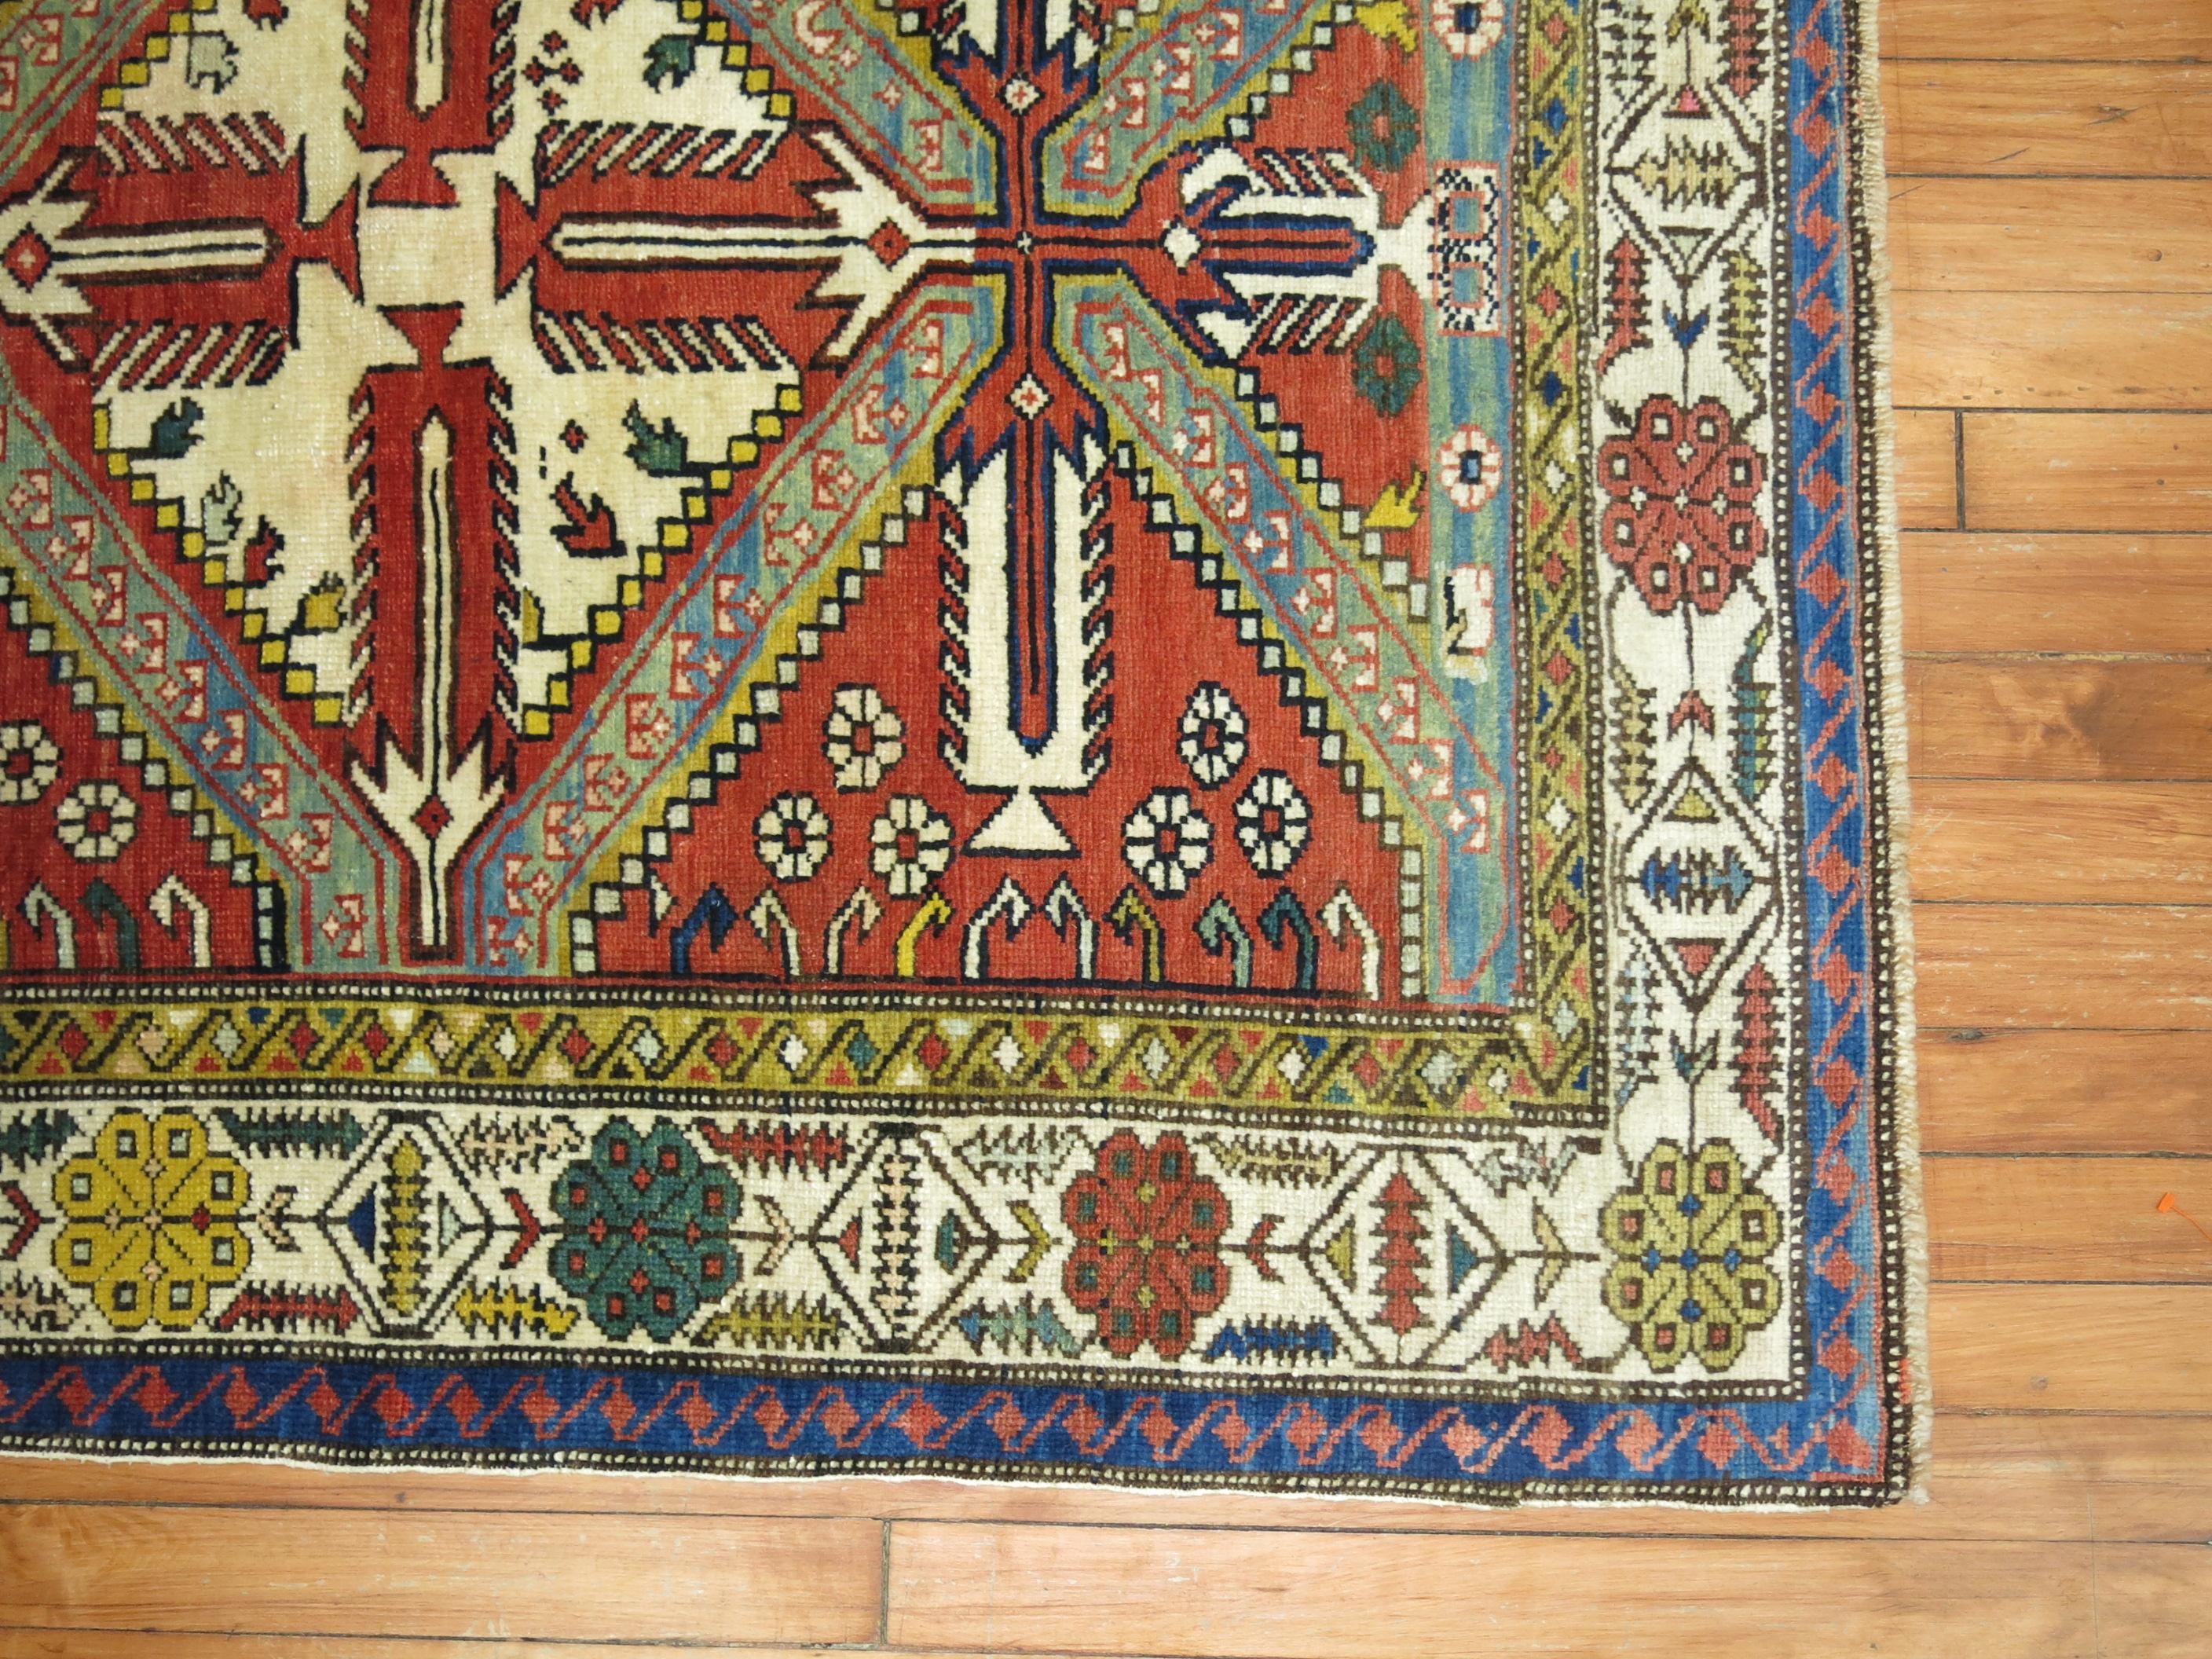 A geometric tribal looking Caucasian shirvan rug from the early 20th century.
Brick red field, earth accents in green and blue,

circa 1910. Measures: 3'8